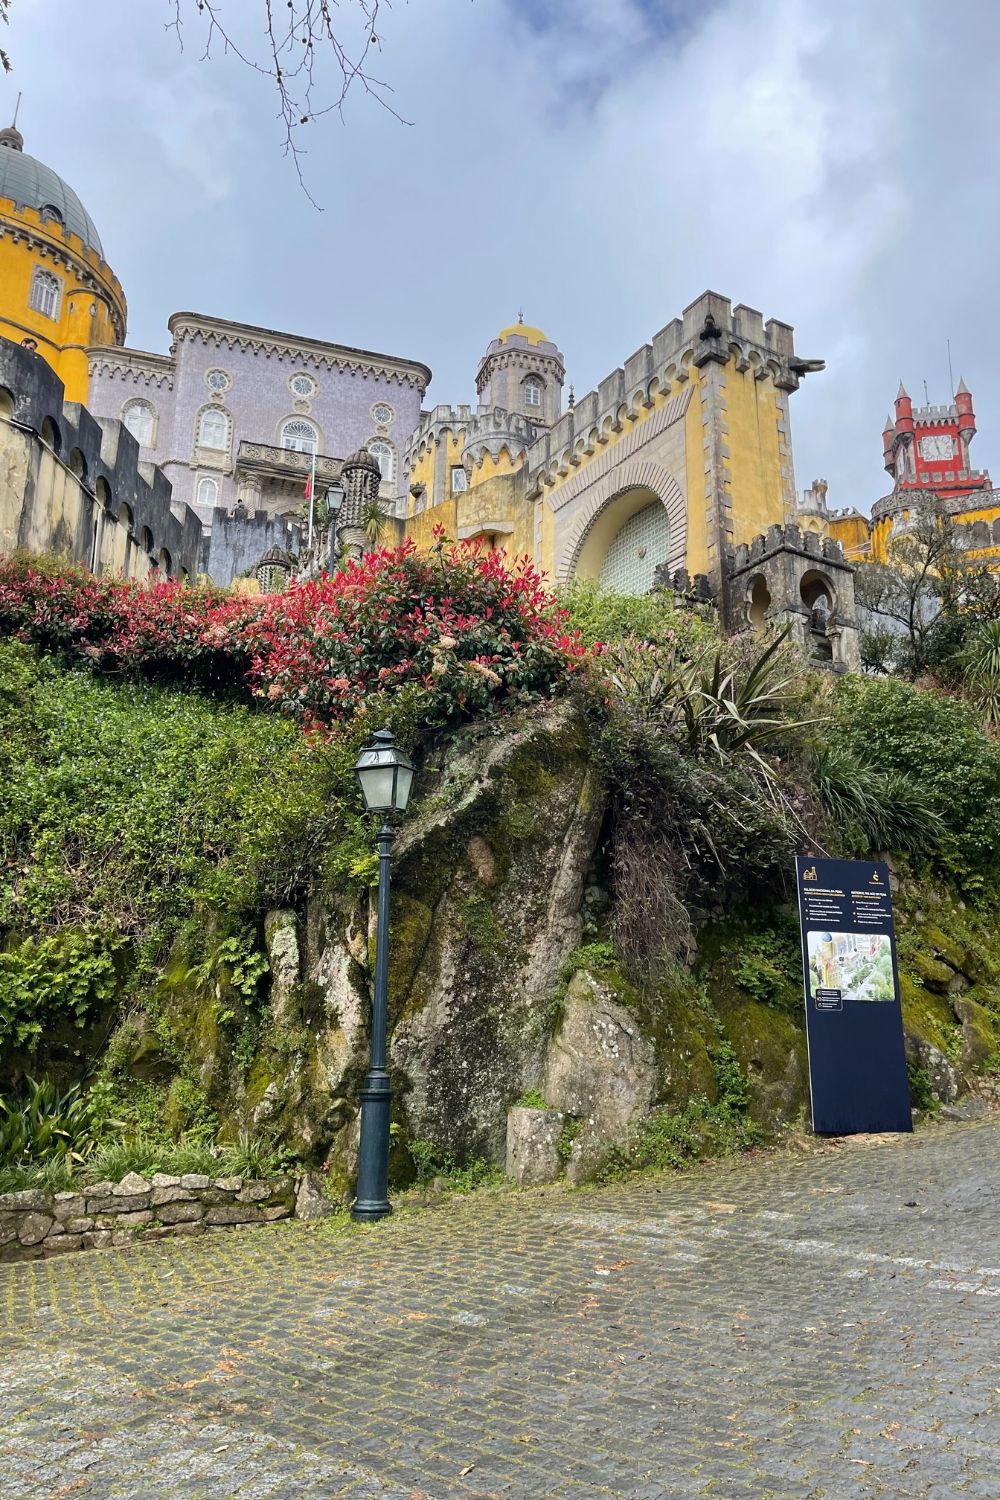 A colorful facade of the Pena Palace in Sintra, Portugal, featuring vibrant yellow and purple walls adorned with traditional Portuguese tiles, surrounded by lush greenery and a vintage street lamp in the foreground.